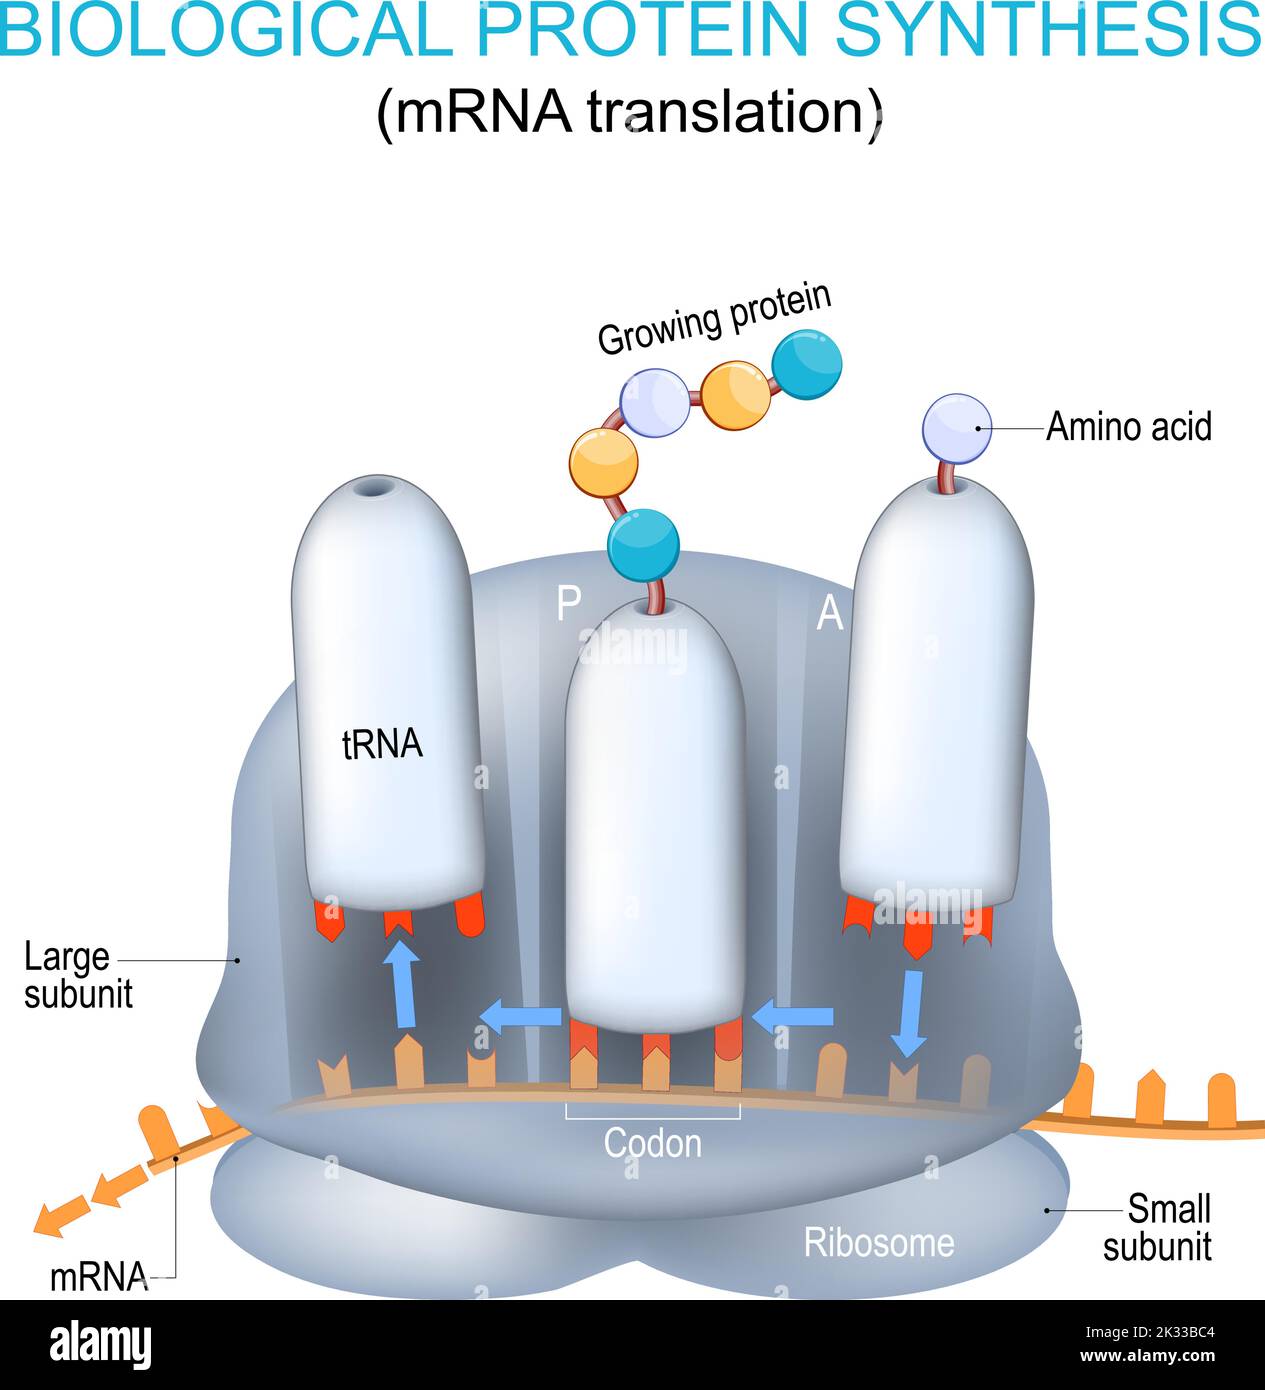 ribosome structure and anatomy. biological protein synthesis. mRNA translation and the synthesis of proteins by a ribosome. tRNA and mRNA Stock Vector